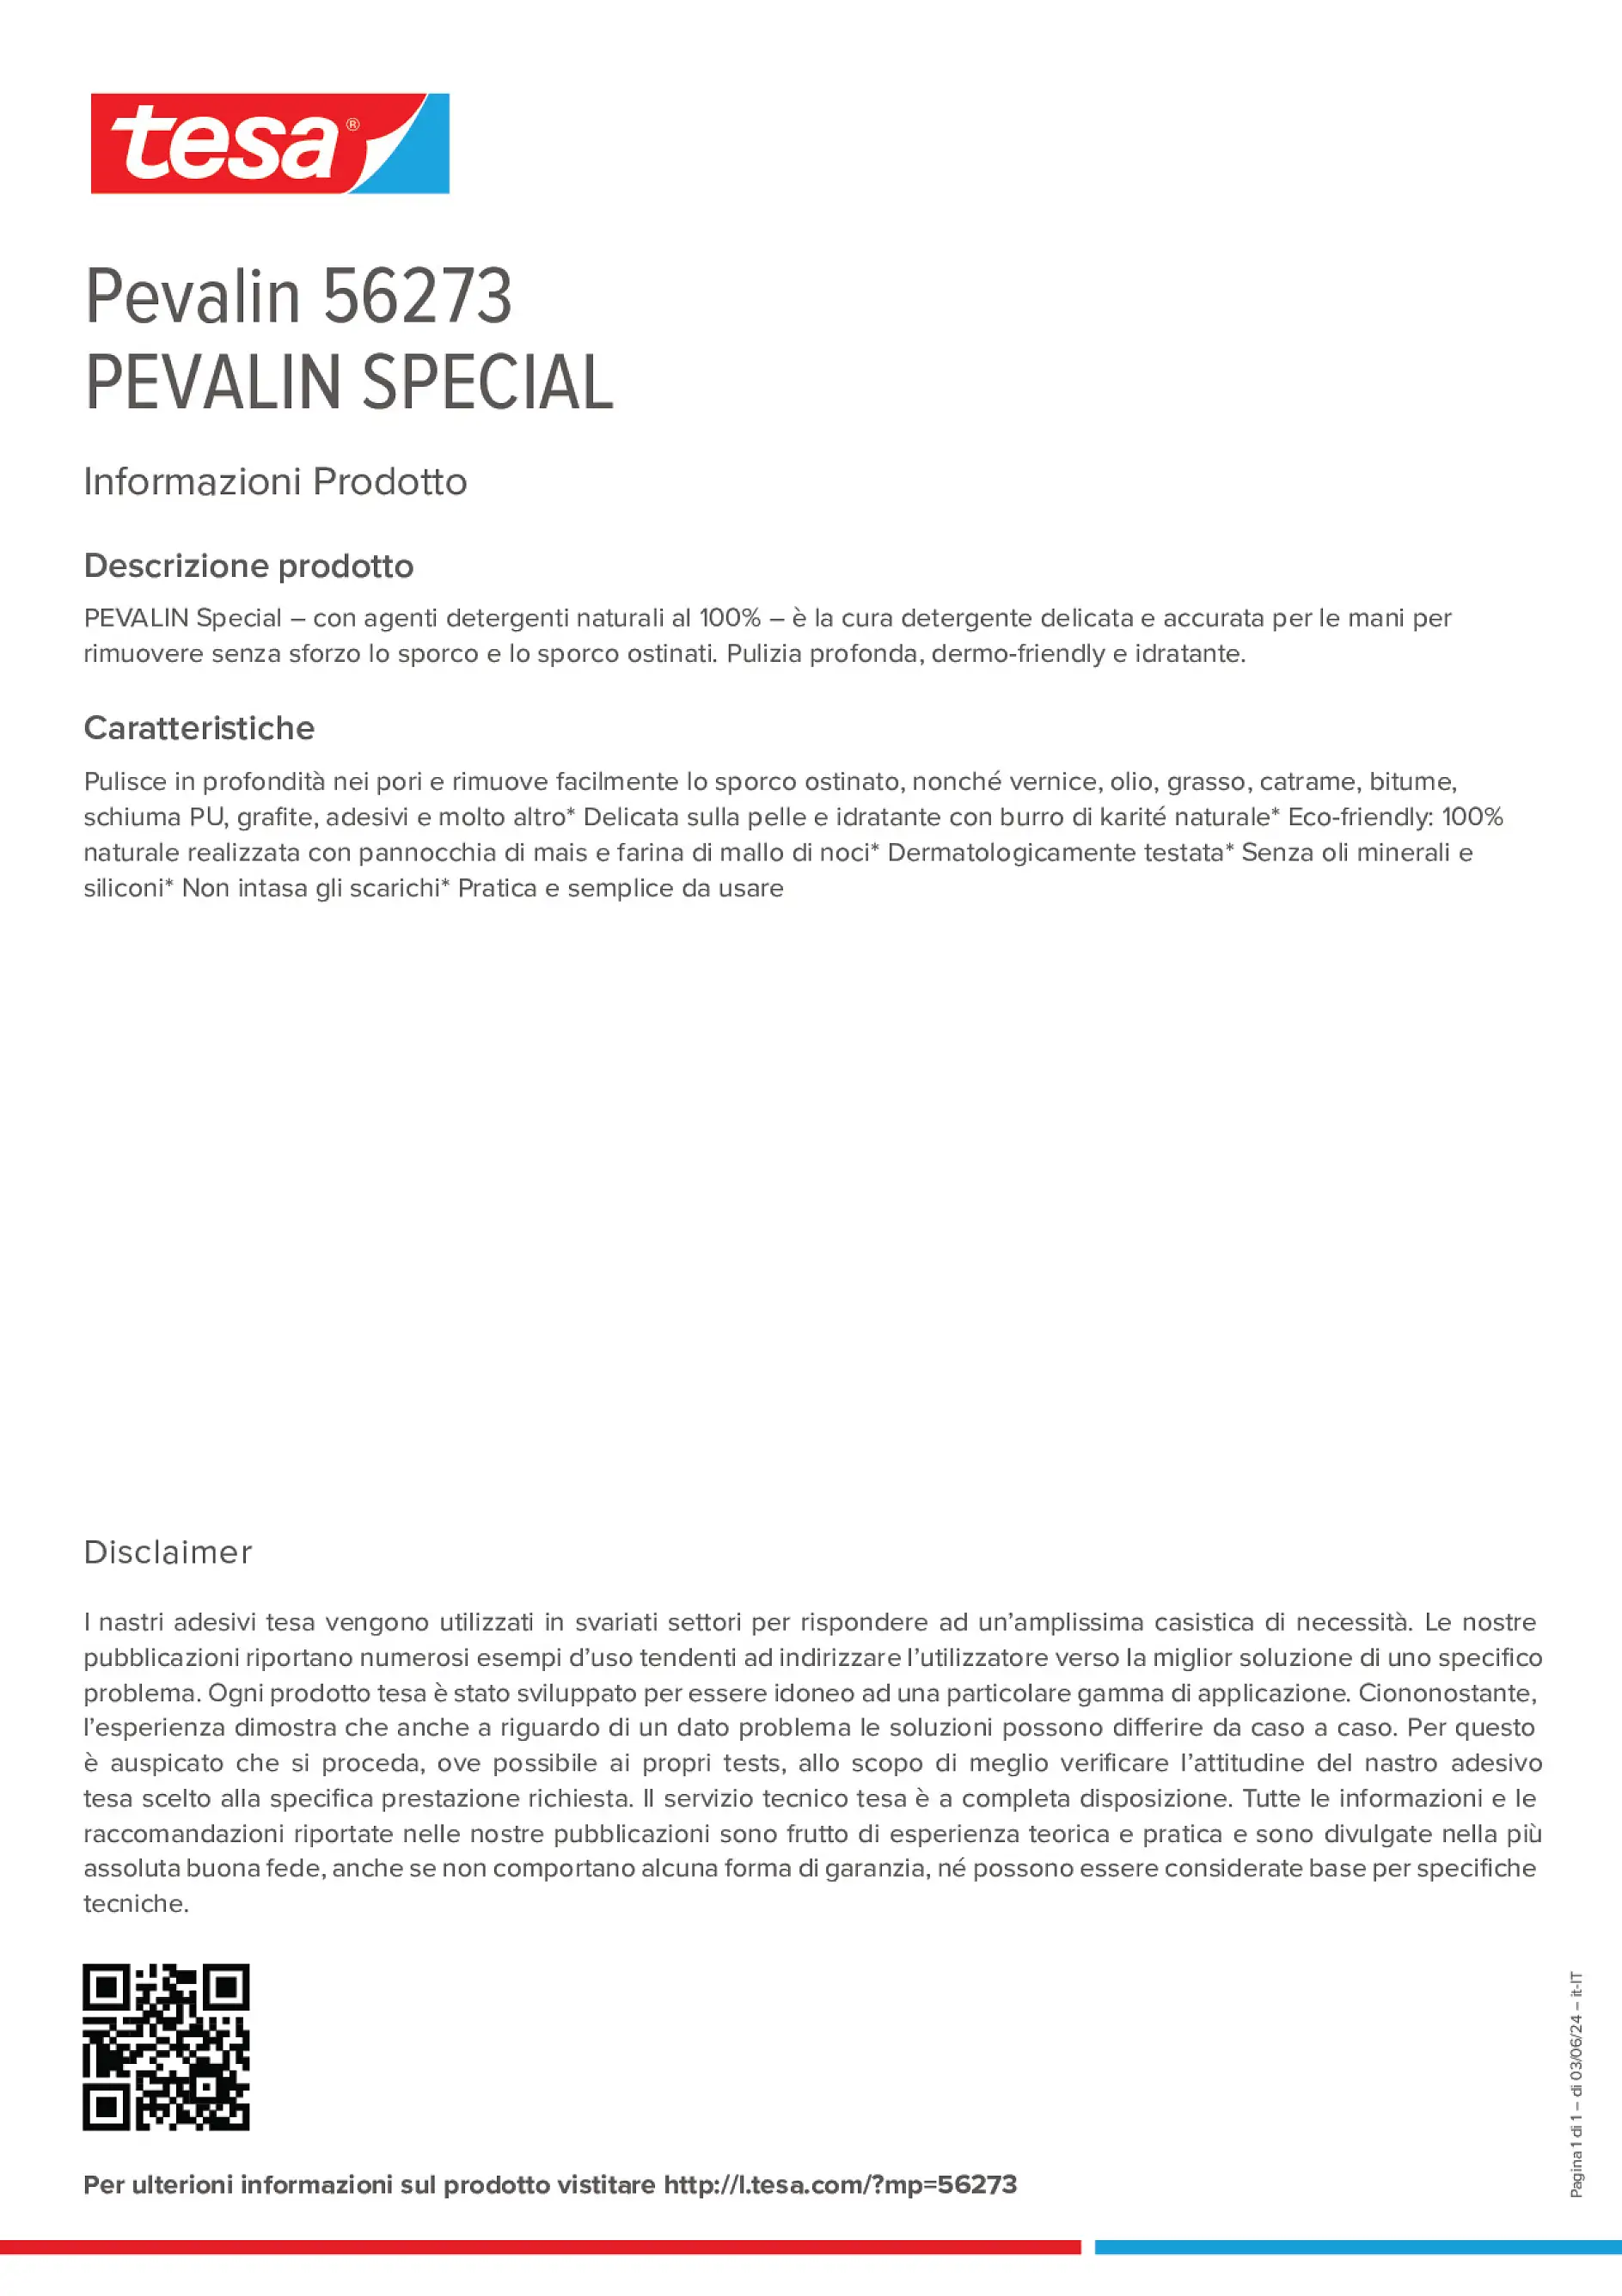 Product information_Pevalin 56273_it-IT